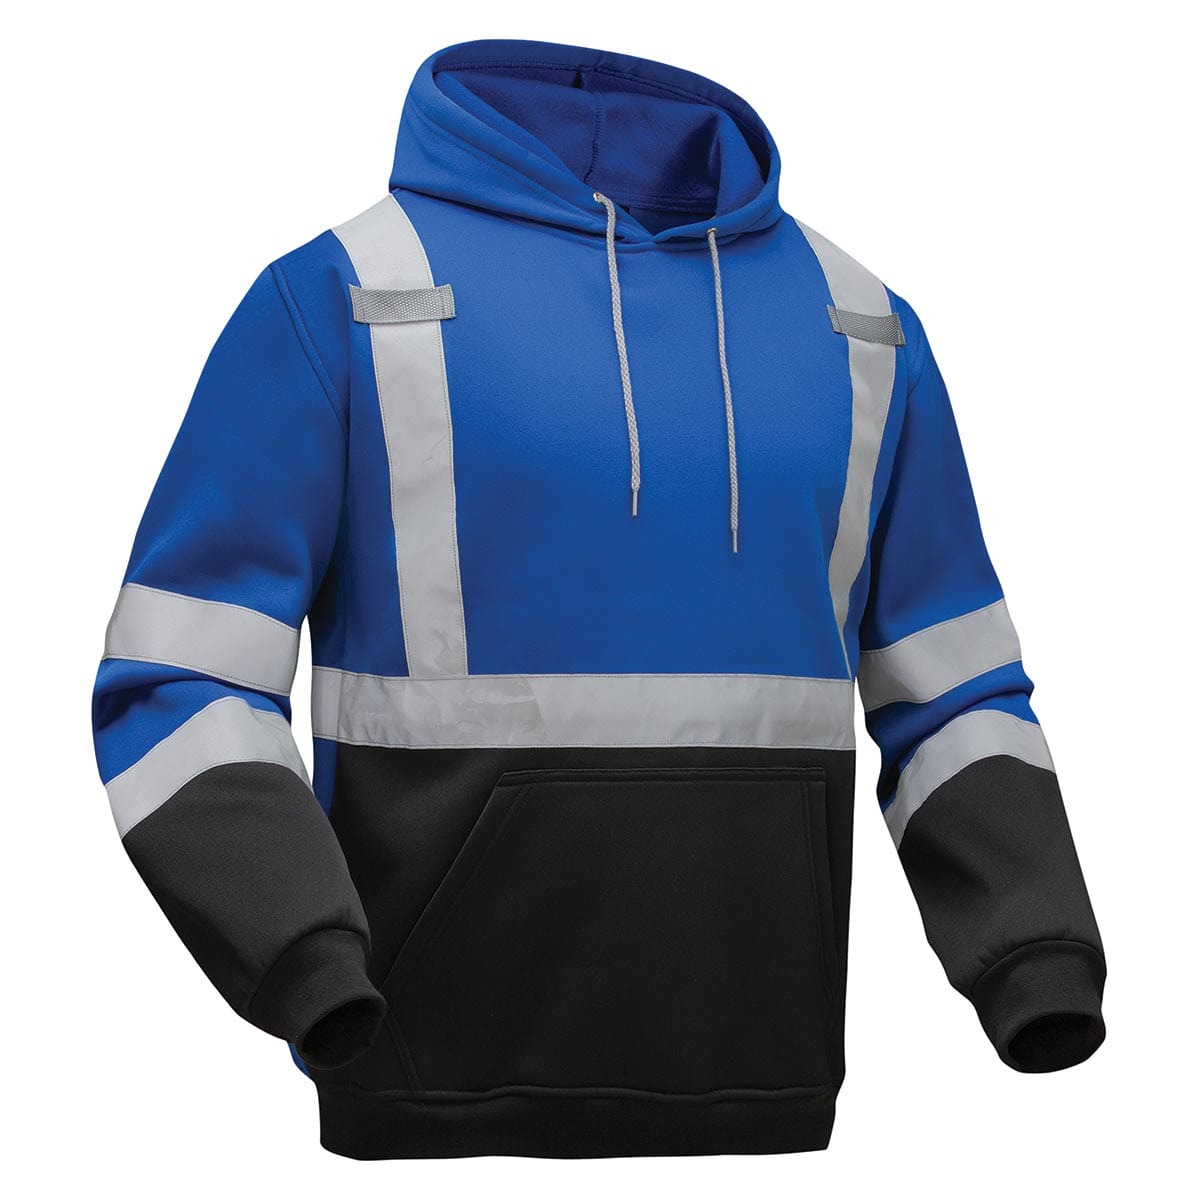 GSS Safety Non-ANSI Enhanced Visibility Pullover Sweatshirt with Reflective Tape